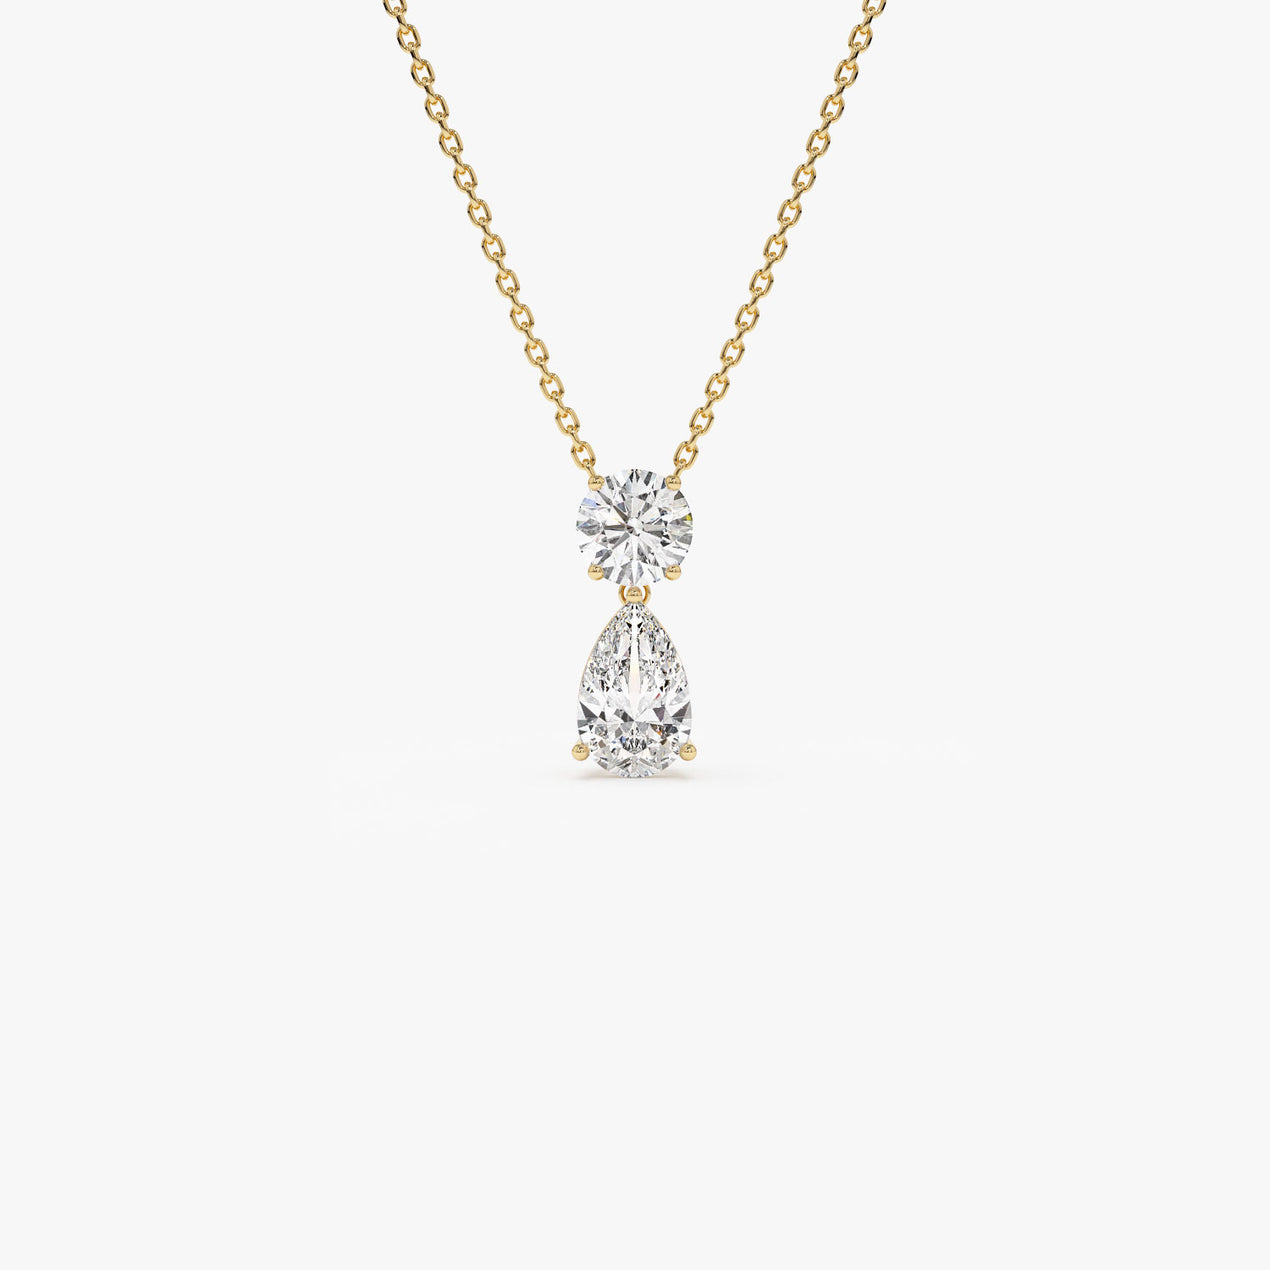 Mixed Shapes Diamond Pendant Necklace 14K Yellow Gold / Pear